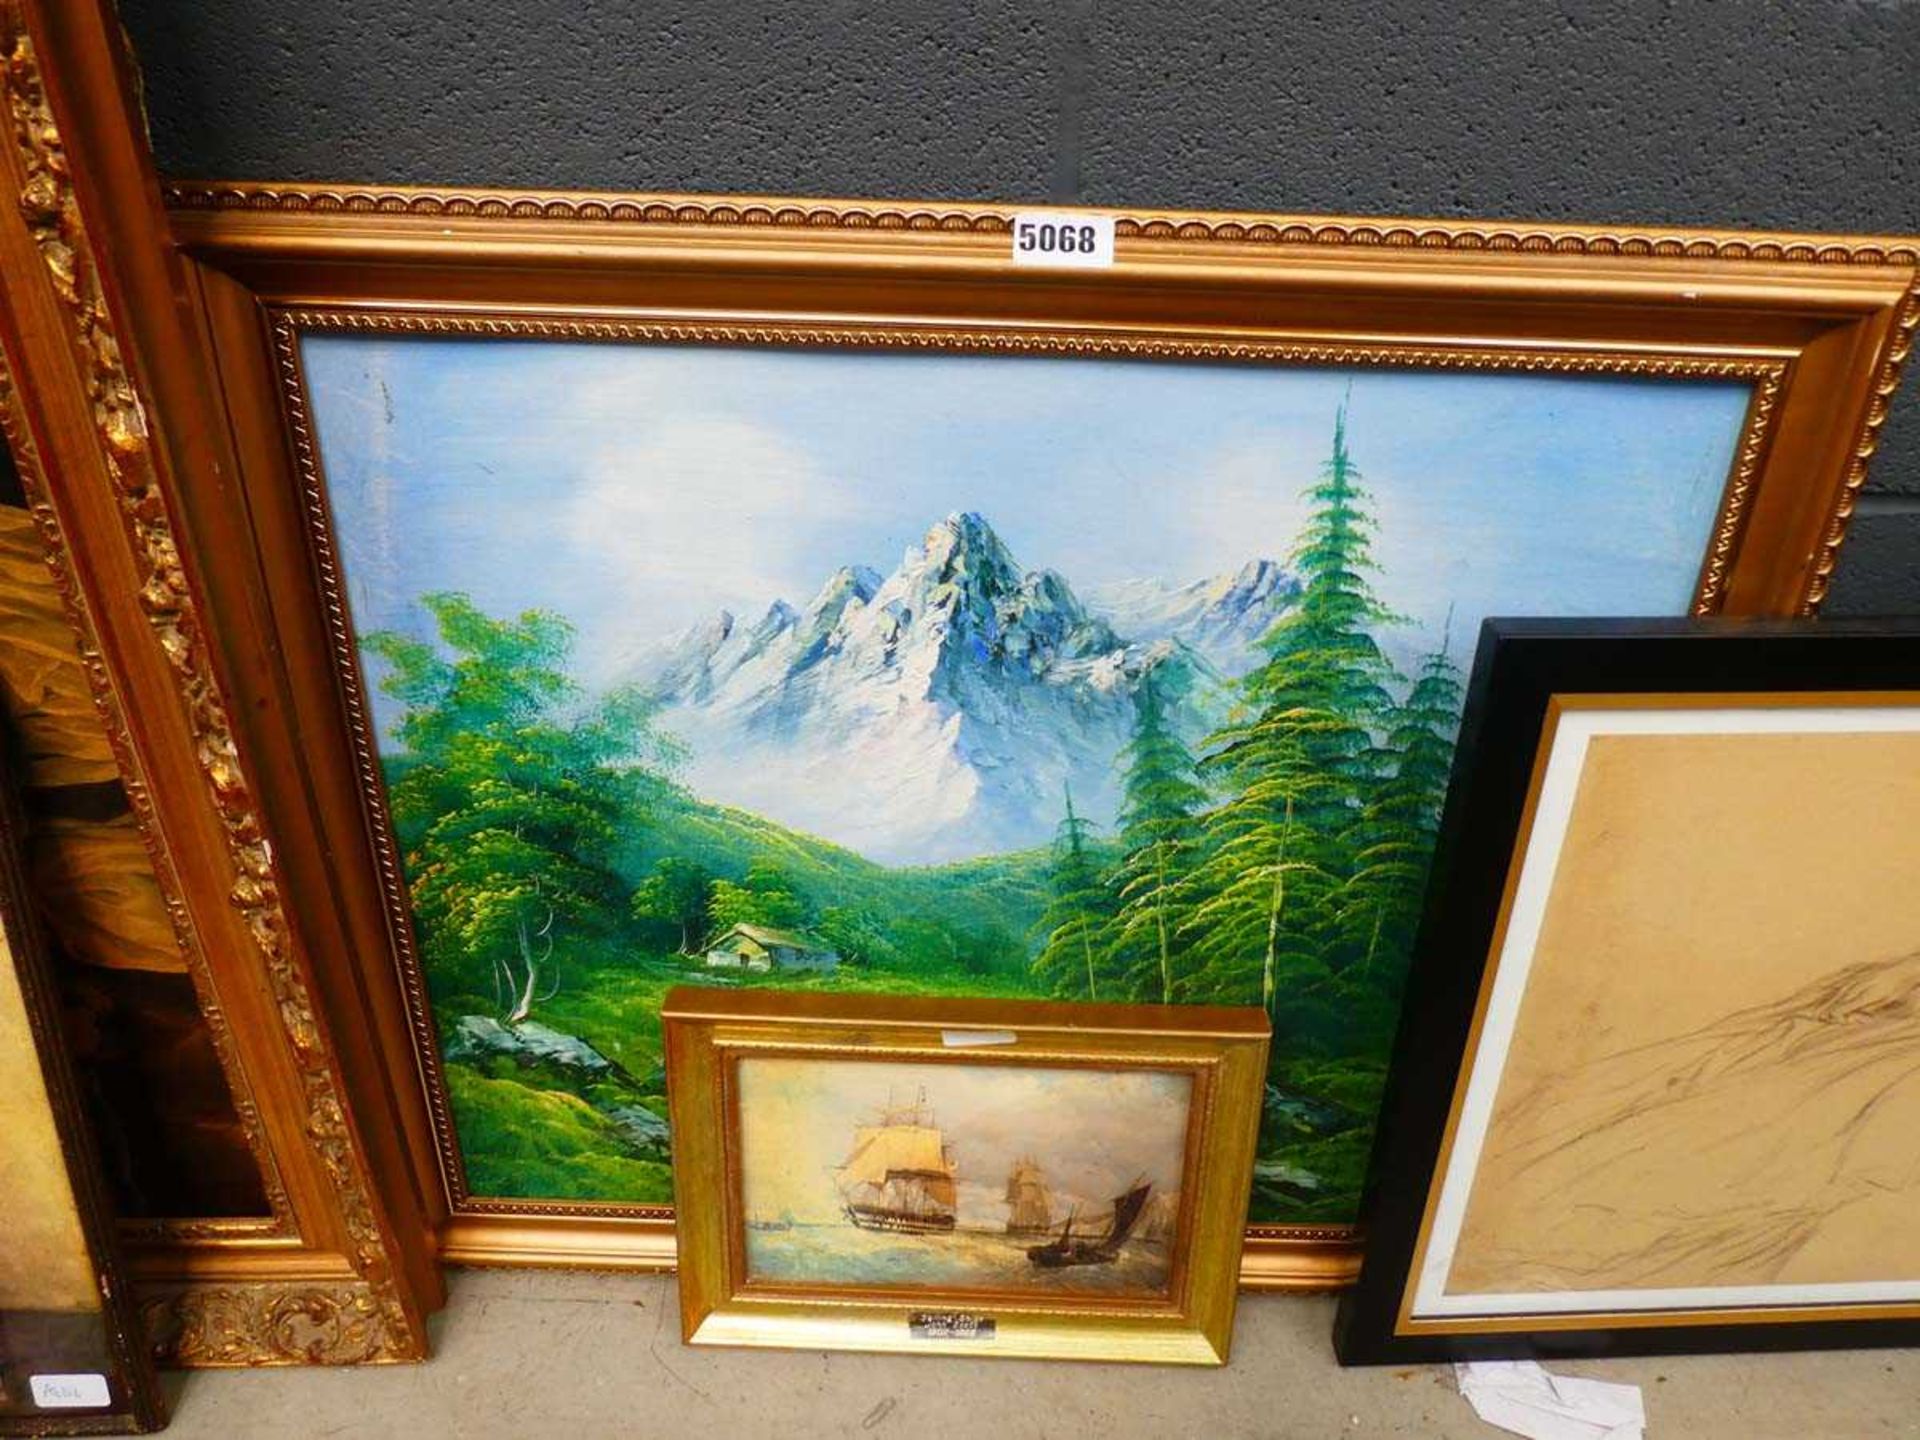 2 paintings of ships and mountainside scene